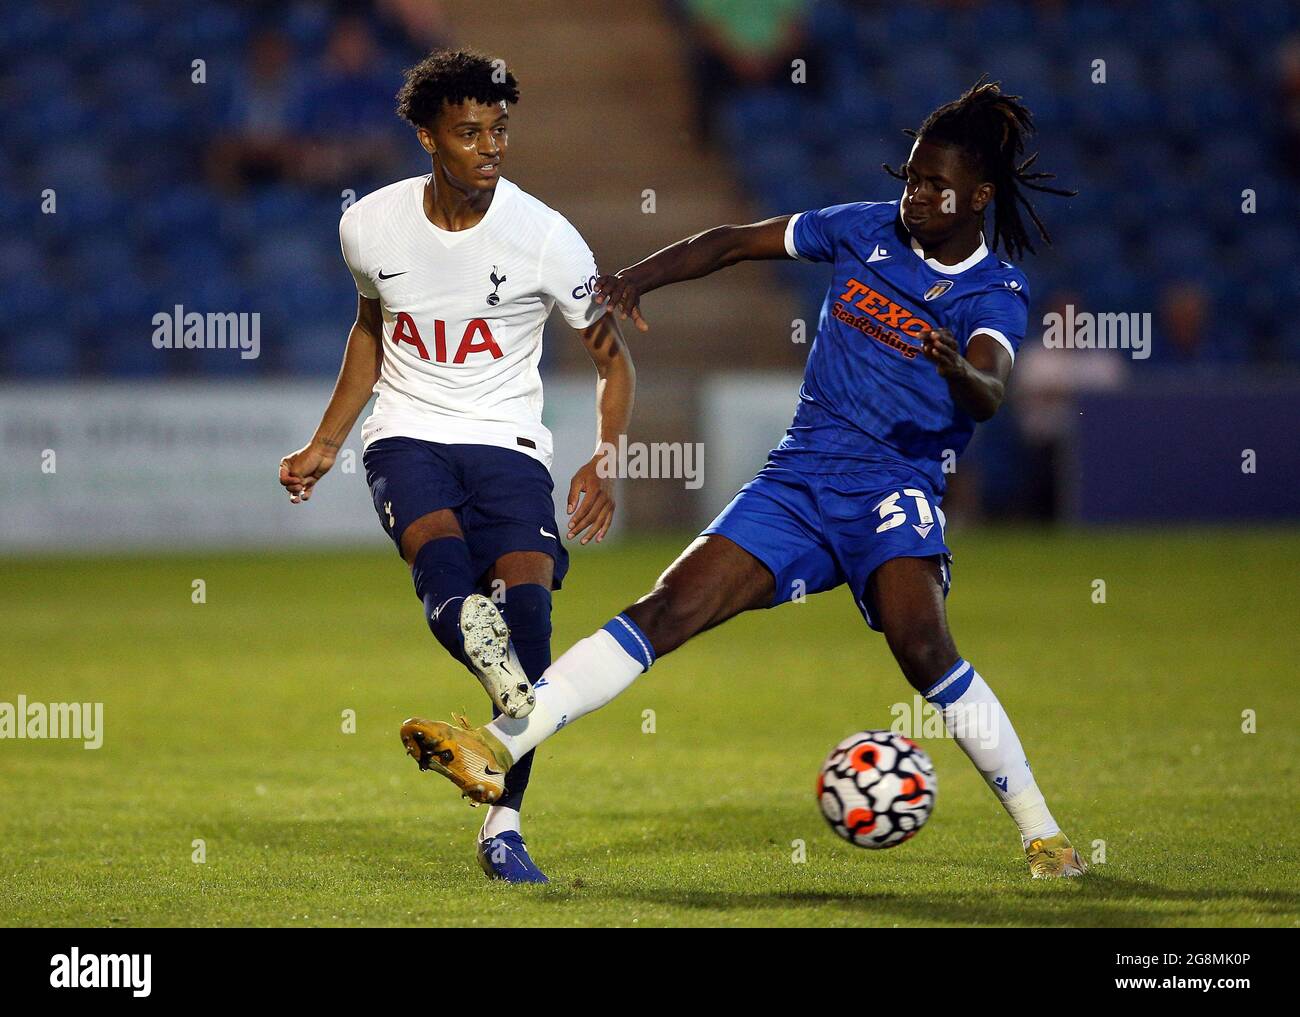 Tottenham Hotspur's Brooklyn Lyons-Foster and Colchester United’s Donell Thomas (right) battle for the ball during the pre-season friendly match at the JobServe Community Stadium, Colchester. Picture date: Wednesday July 21, 2021. Stock Photo